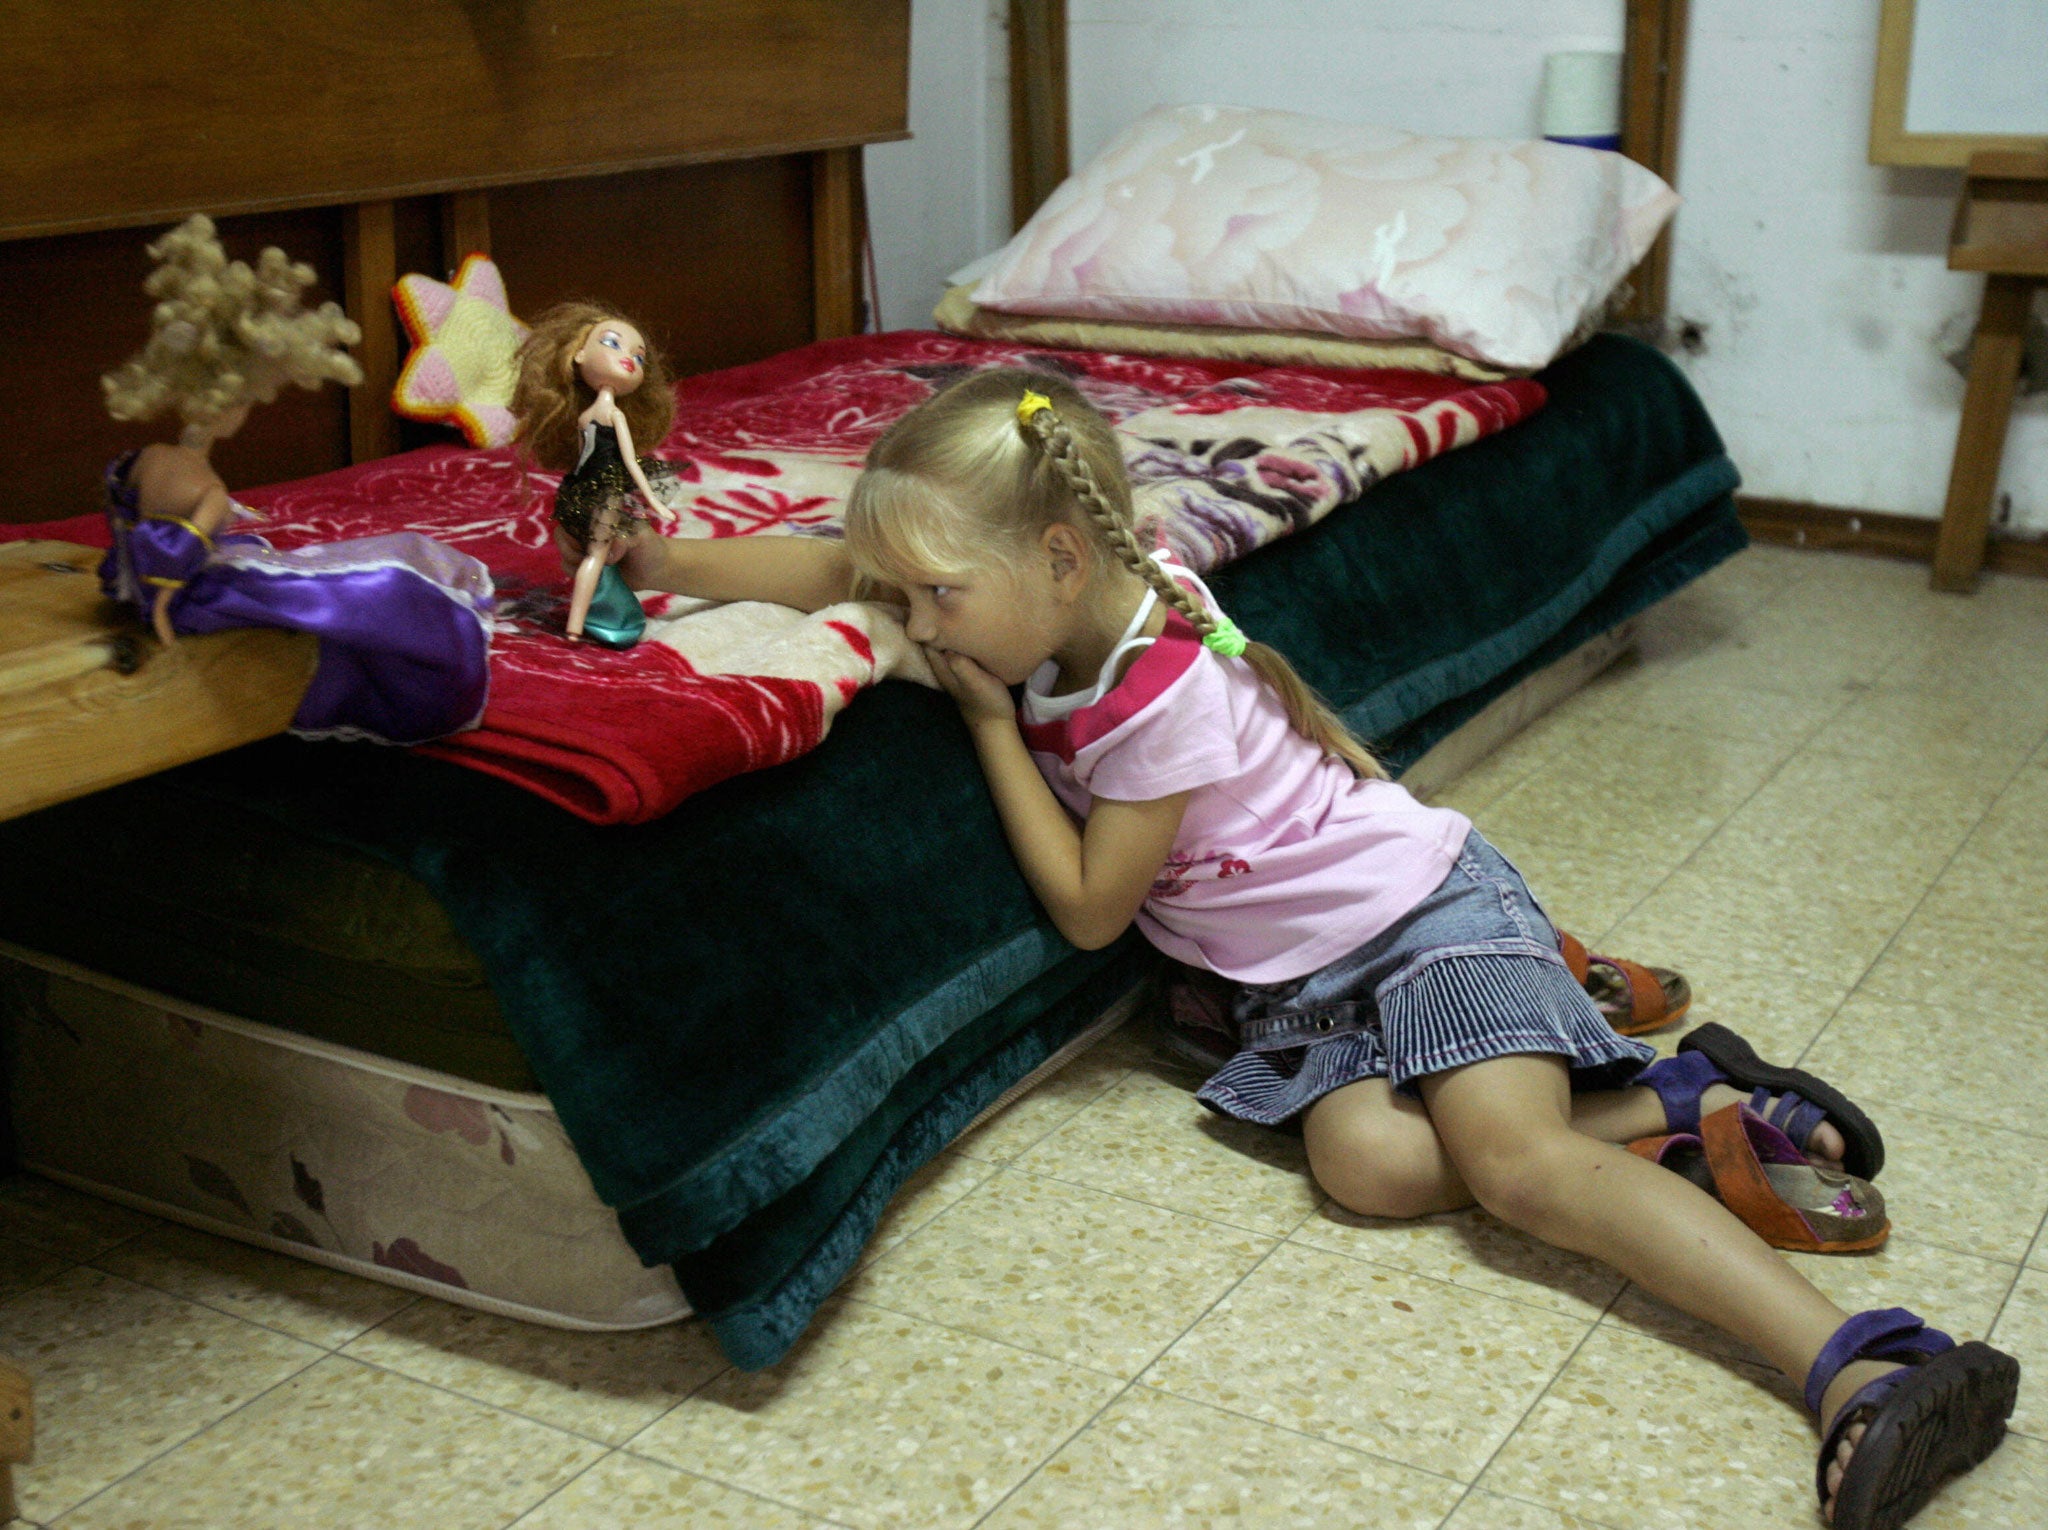 A little girl plays with her dolls